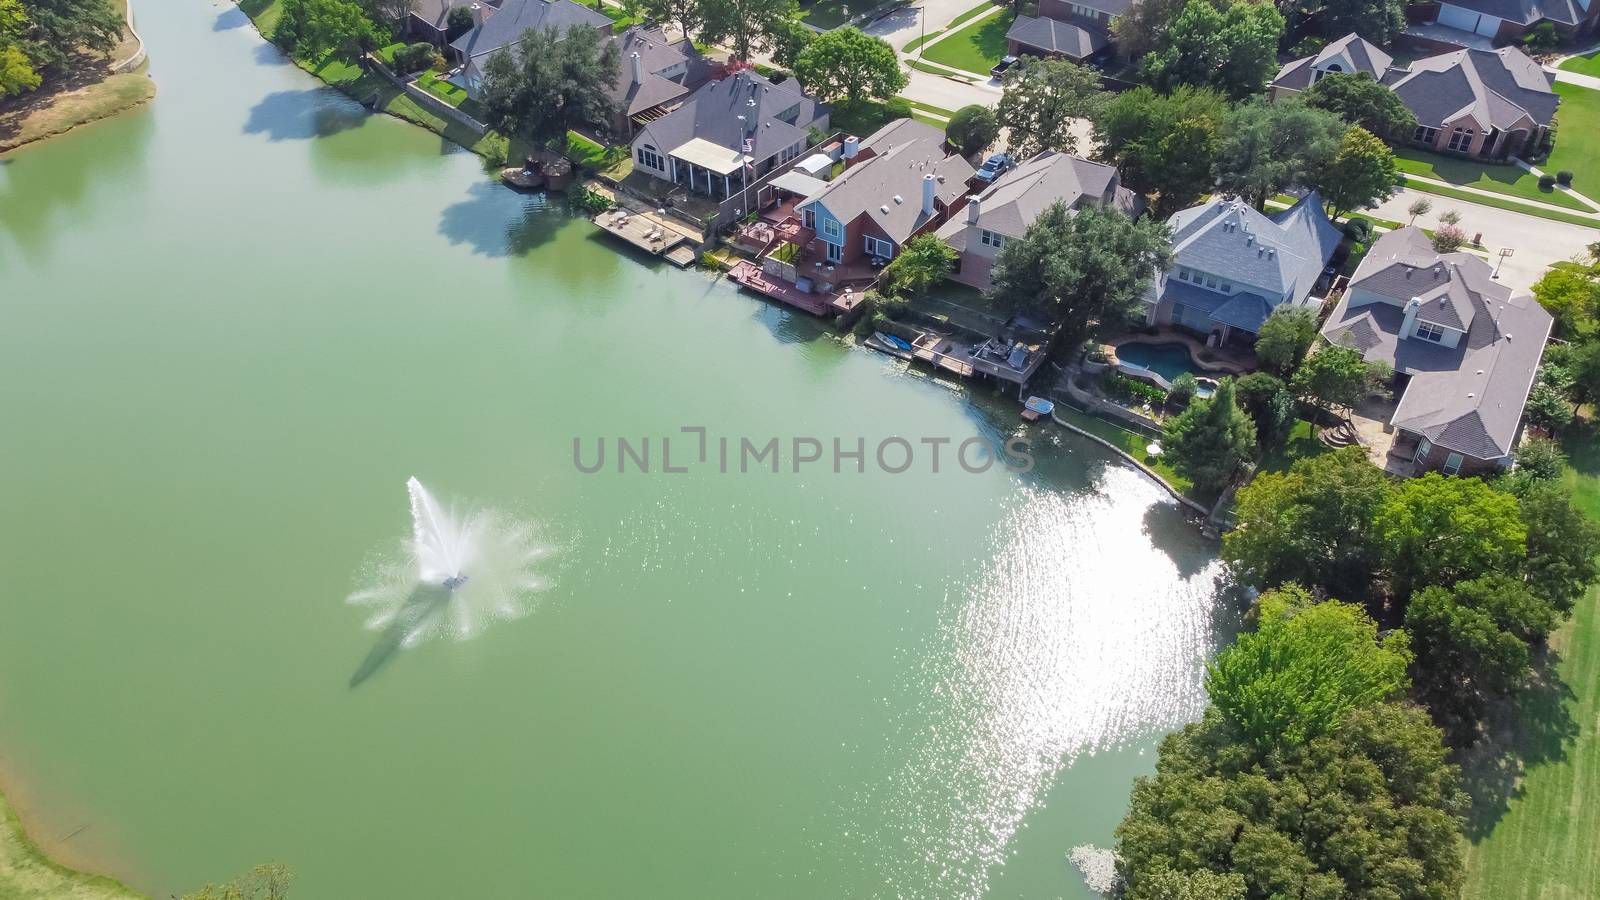 Top view upscale lakeside houses with water fountain in Flower Mound, Texas, America. Row of two story waterfront homes with private docking, swimming pools. Wealthy residential area